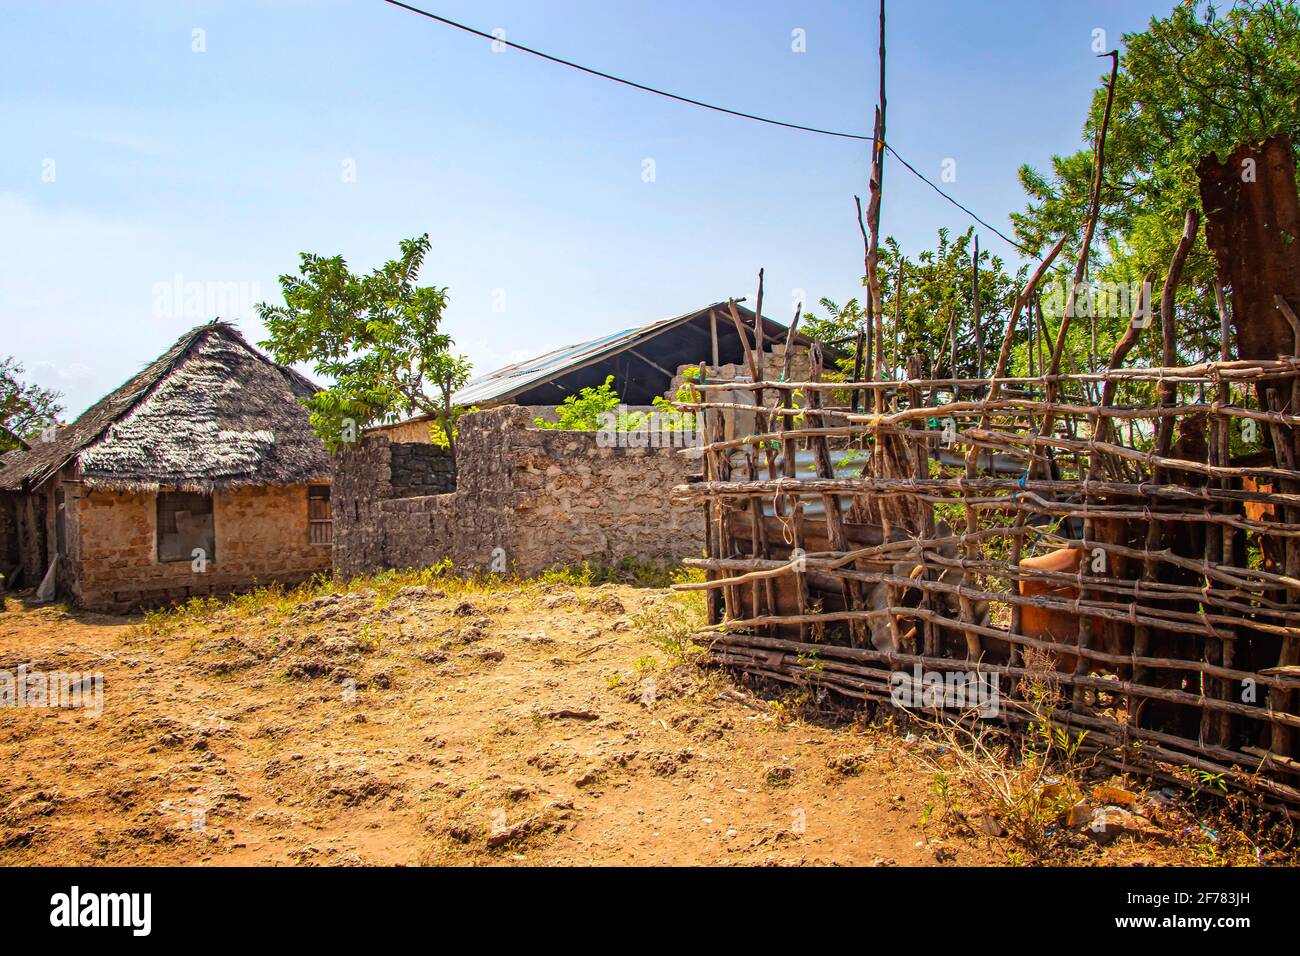 Typical stone houses in an African village on Wasini island. It is a small village in Kenya. Stock Photo